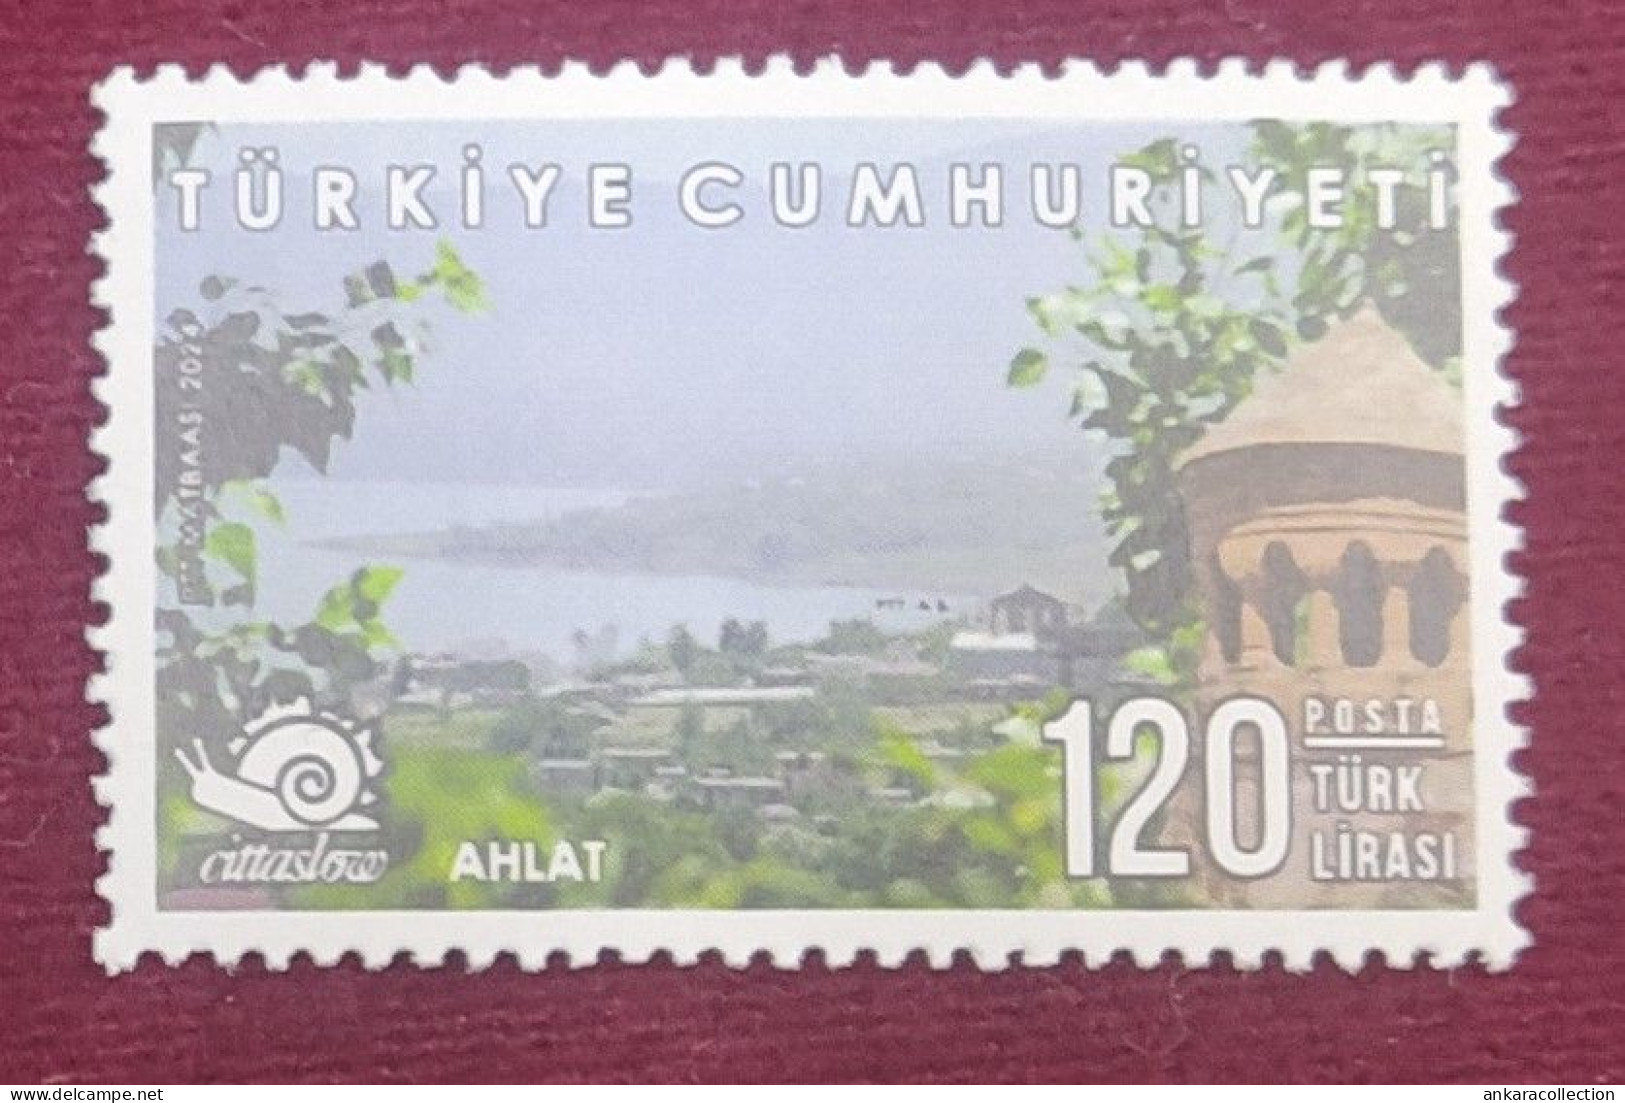 AC - TURKEY STAMP  THE  DEFINITIVE POSTAGE STAMP WITH THE THEME OF CITTASLOW-4 MNH  22 MARCH 2024 - Unused Stamps